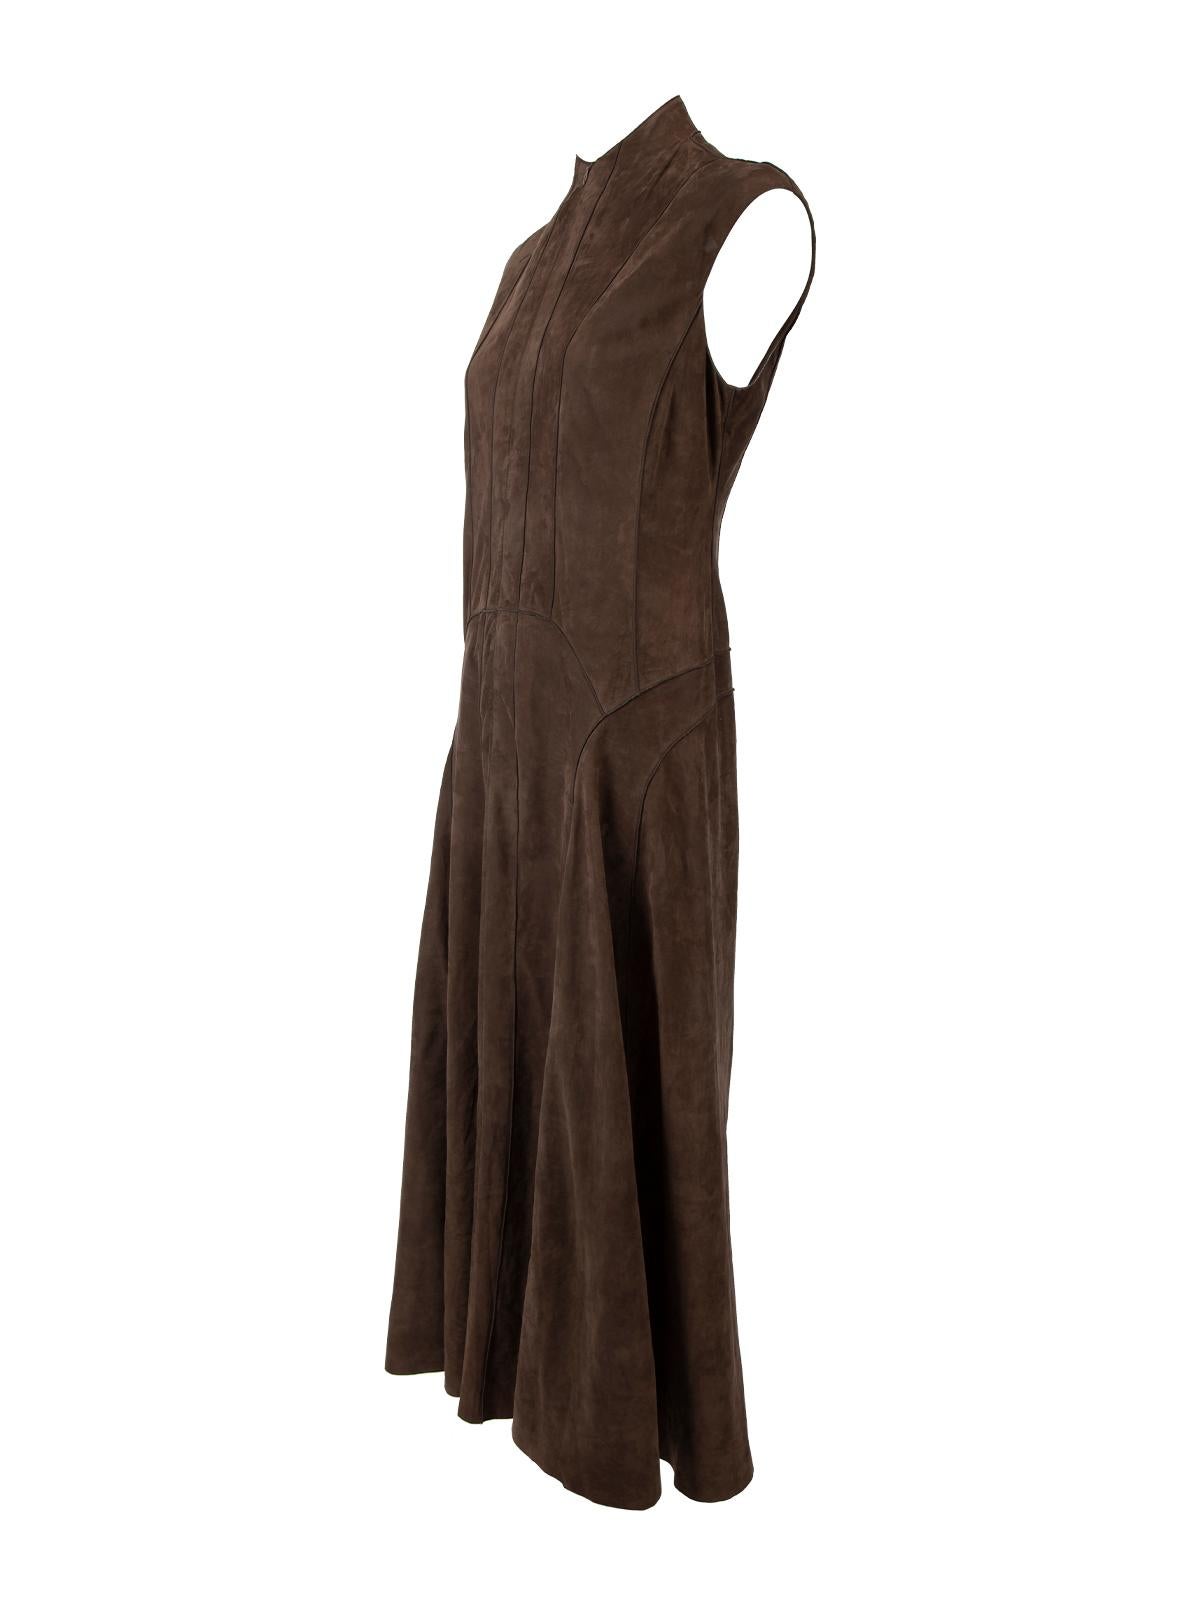 Pre-Loved Calvin Klein Women's Brown Suede Sleeveless Drop Waist Flared Dress In Excellent Condition In London, GB